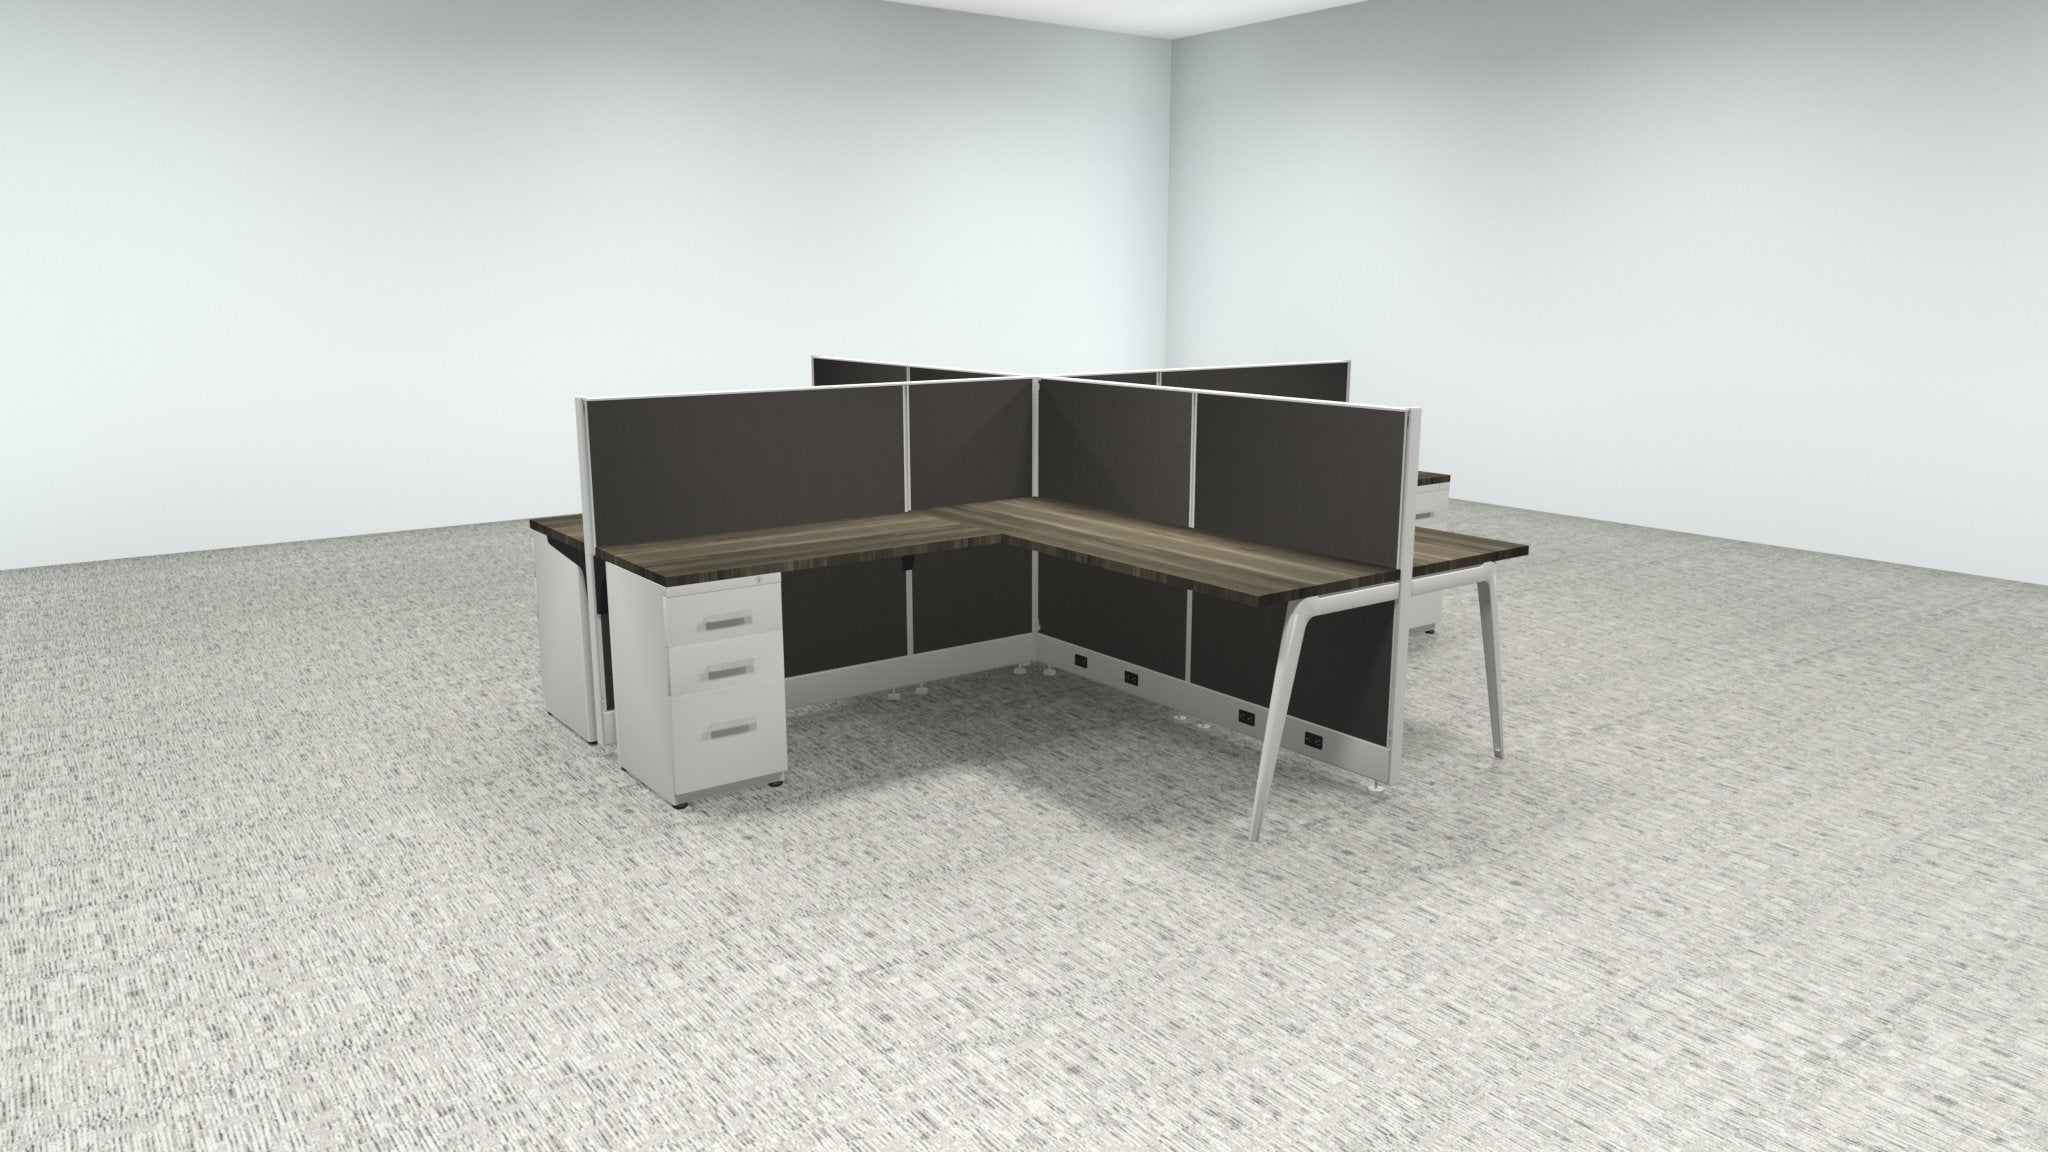 6x6 Modern Office Cubicle Pack